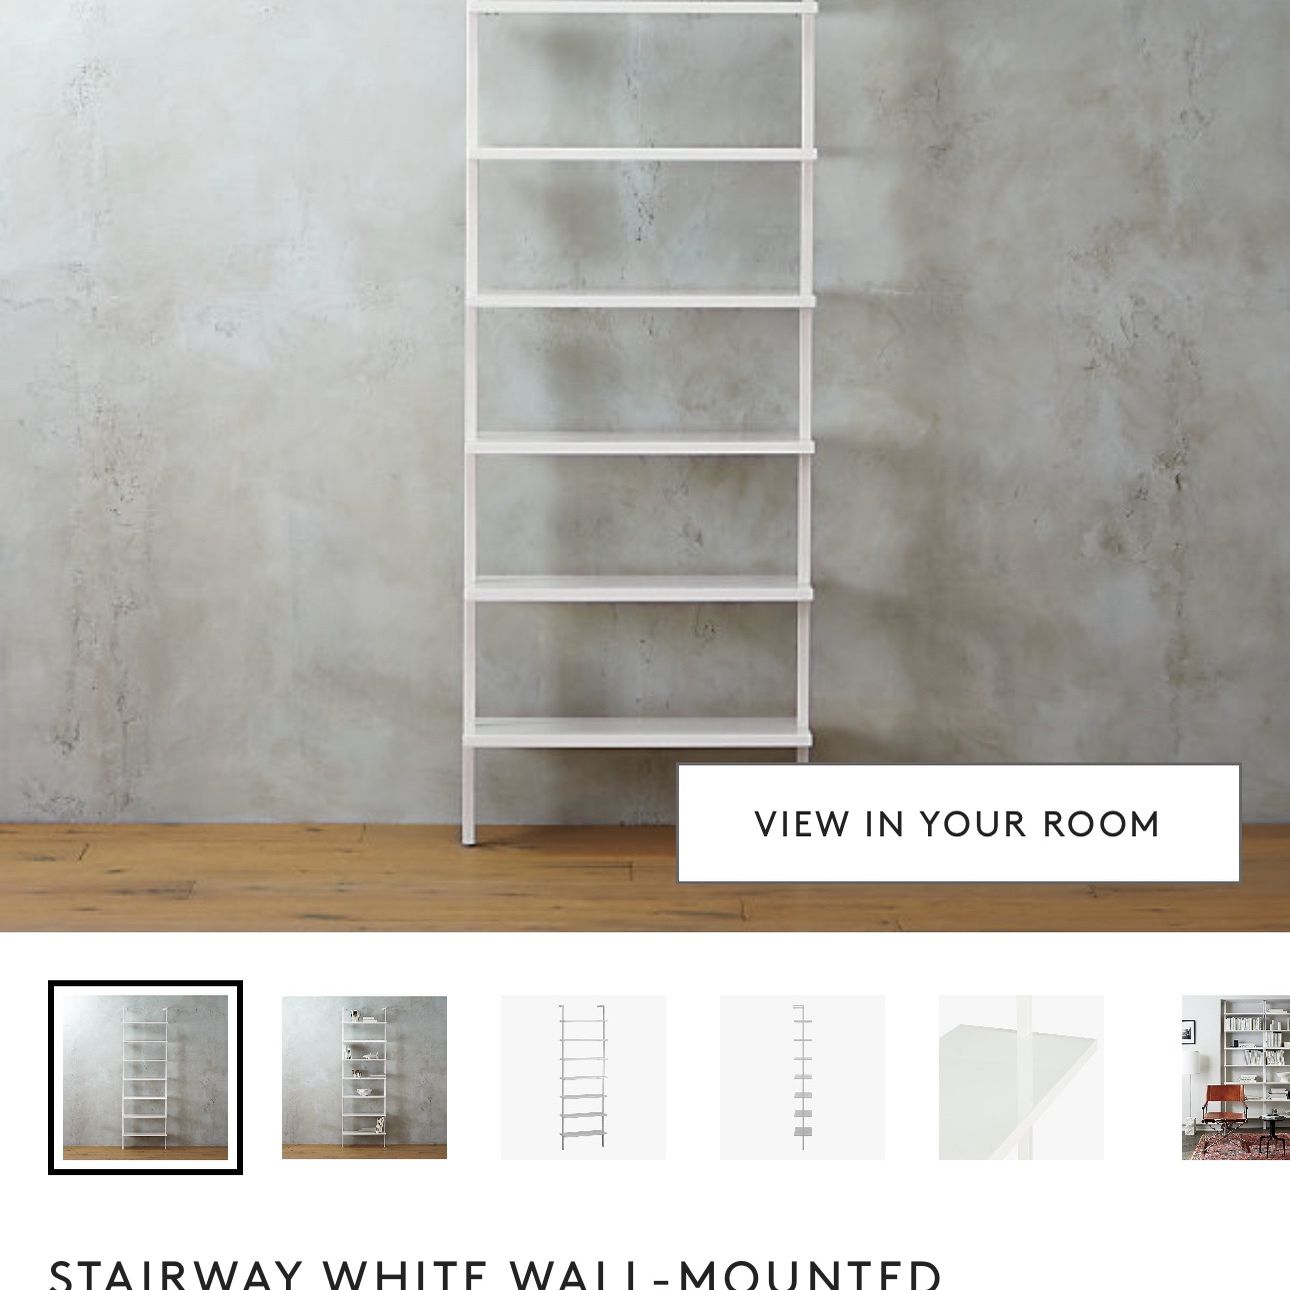 CB2 crate And Barrel 96” White Stairway Bookcase 